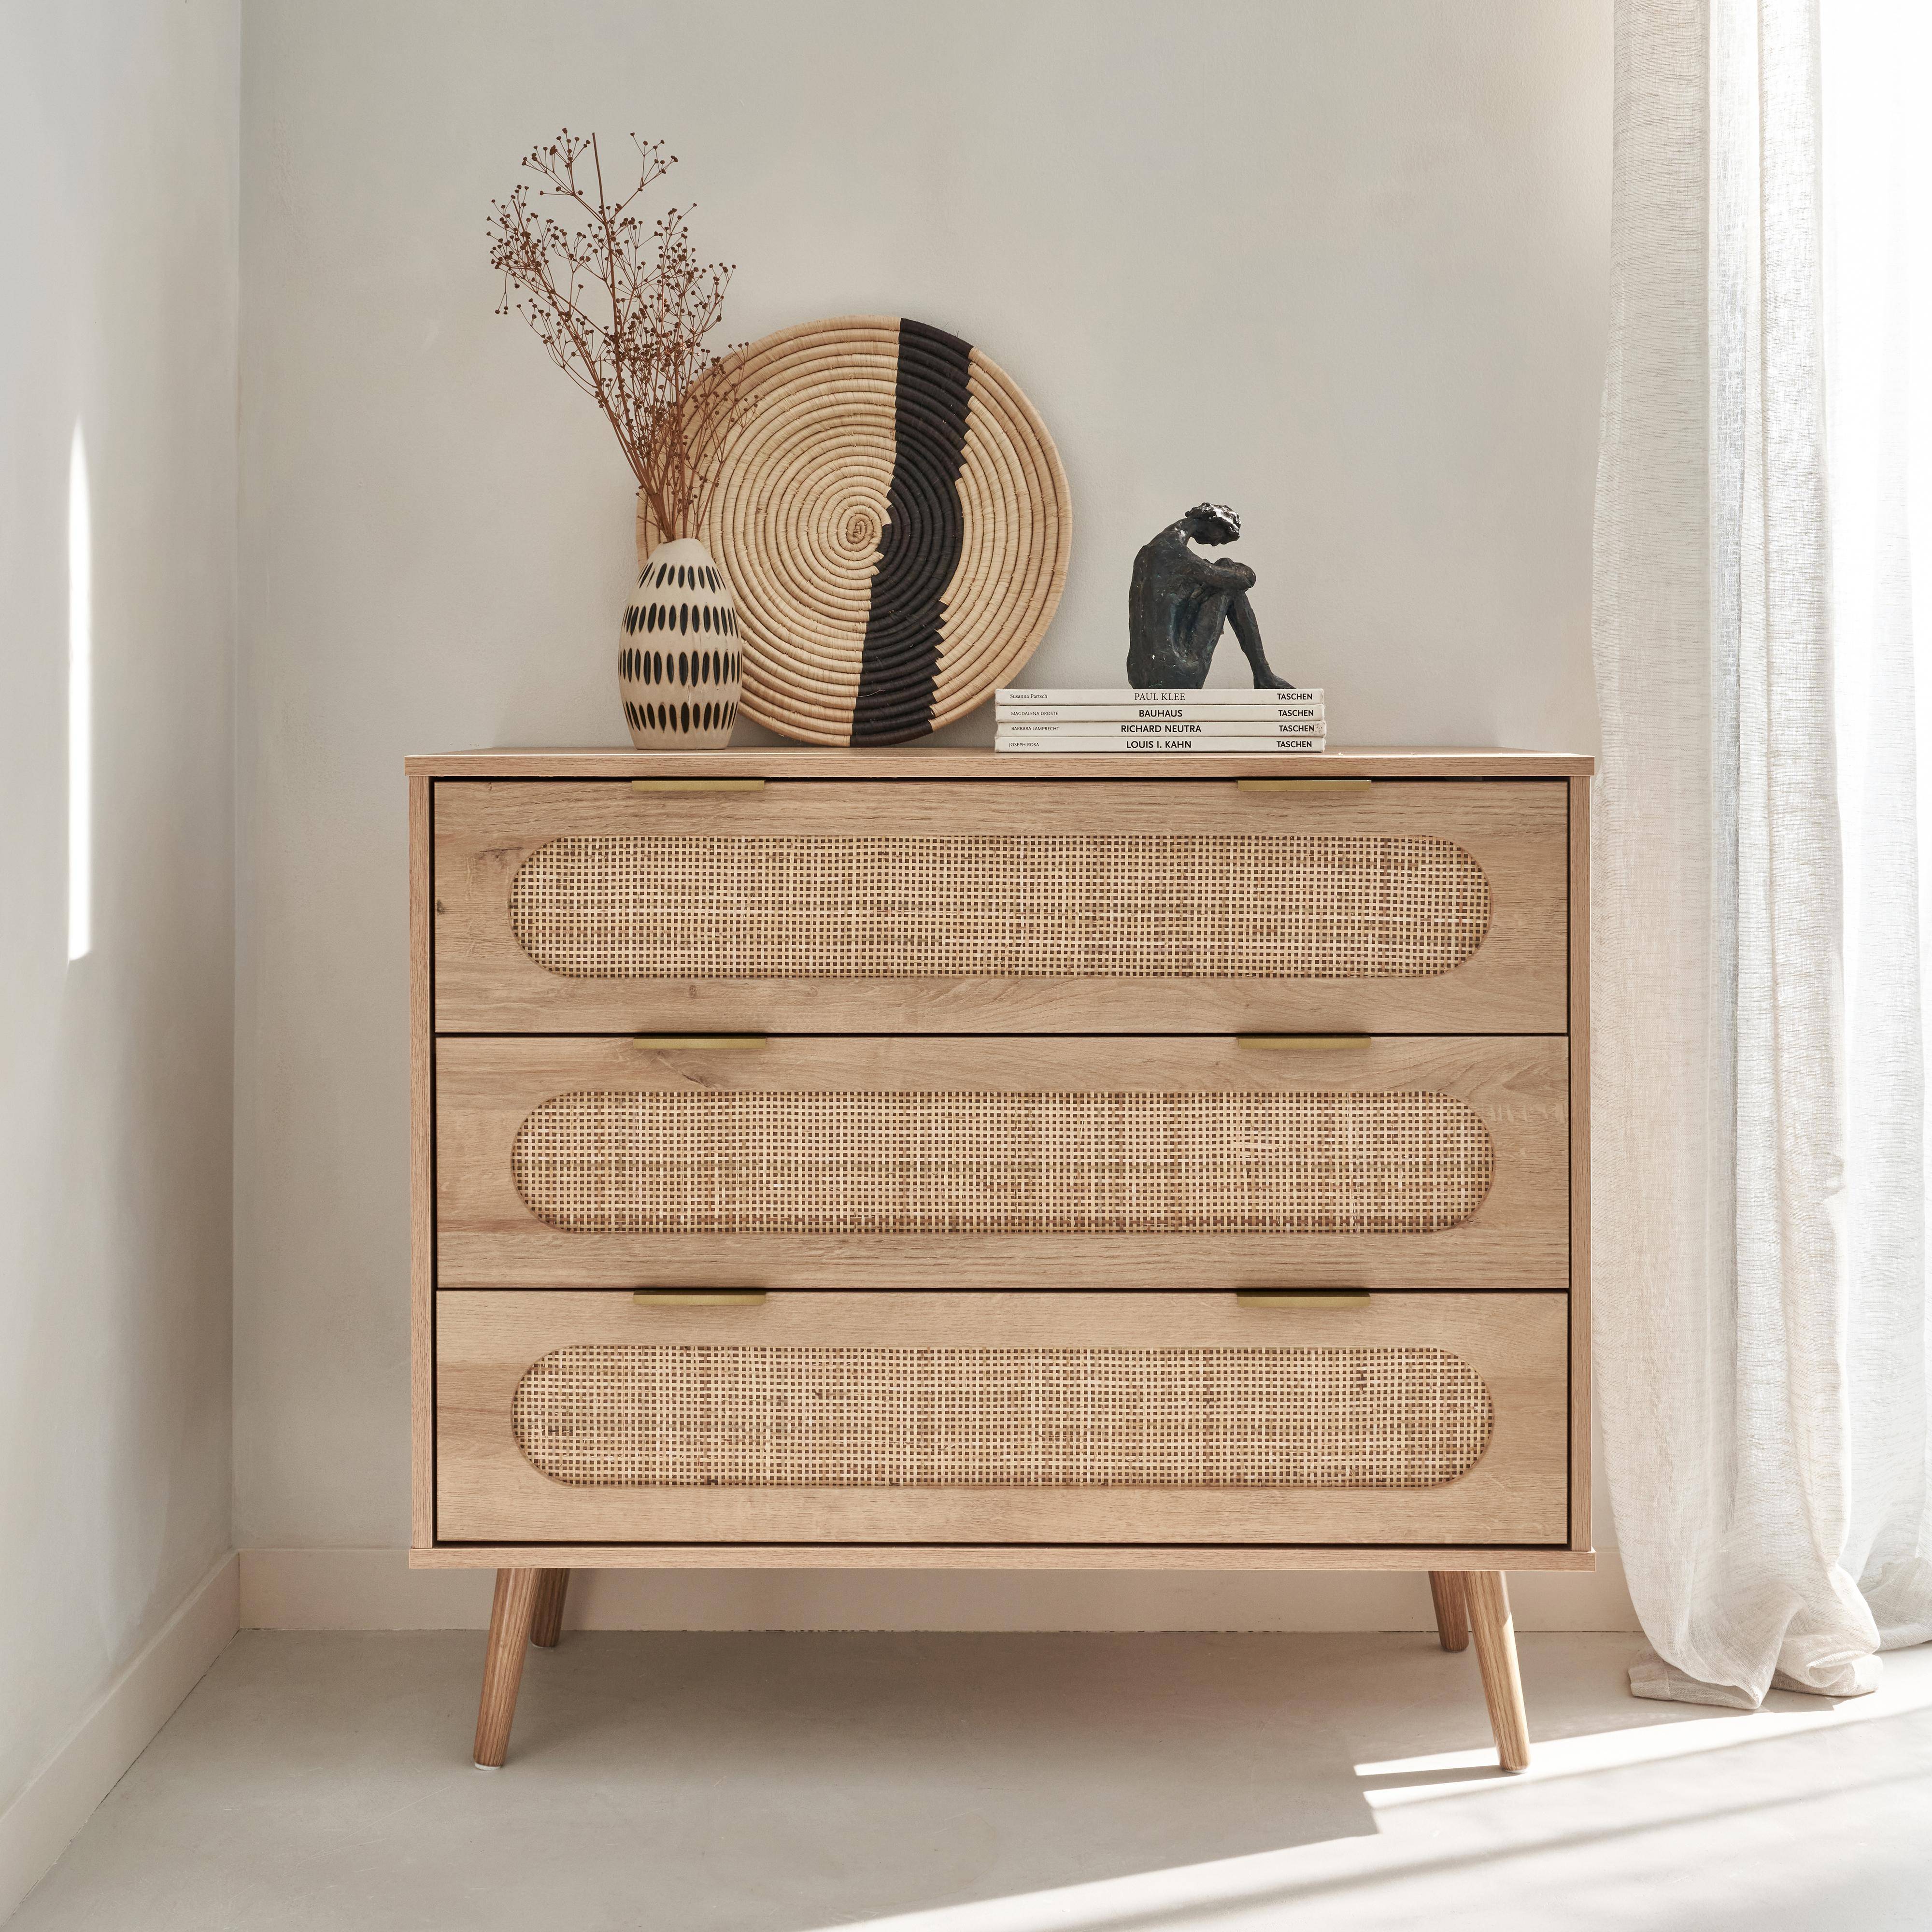 Chest of drawers, Eva, wood decor and rounded cane, 3 drawers L 90 x W 39 x H 79cm Photo1